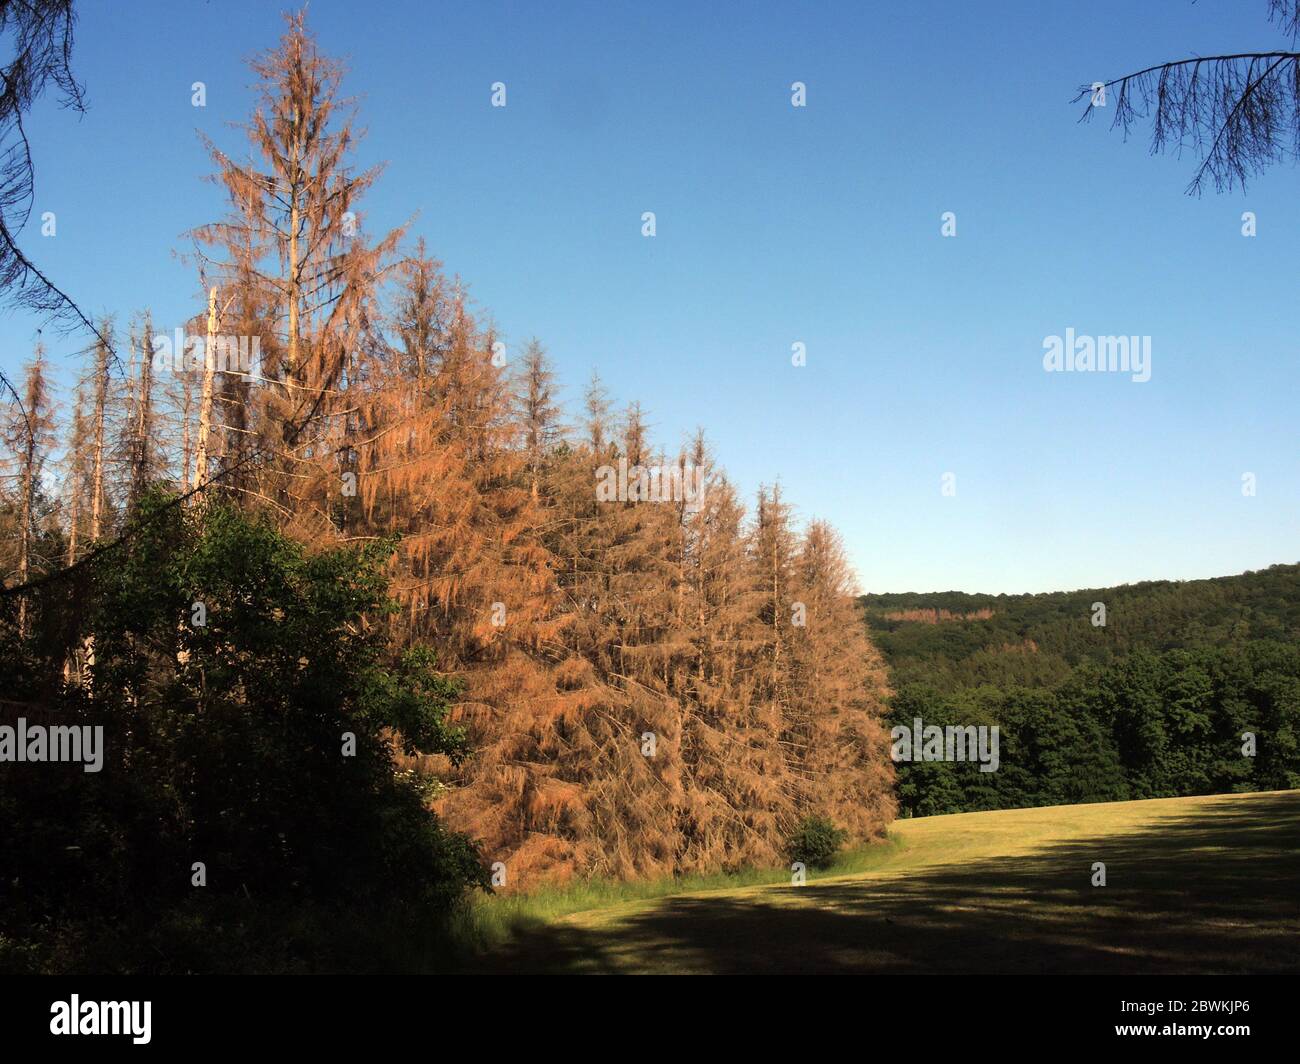 Norway spruce (Picea abies), dead spruce forest caused by dryness and bark beetle, Germany, North Rhine-Westphalia, Bergisches Land Stock Photo